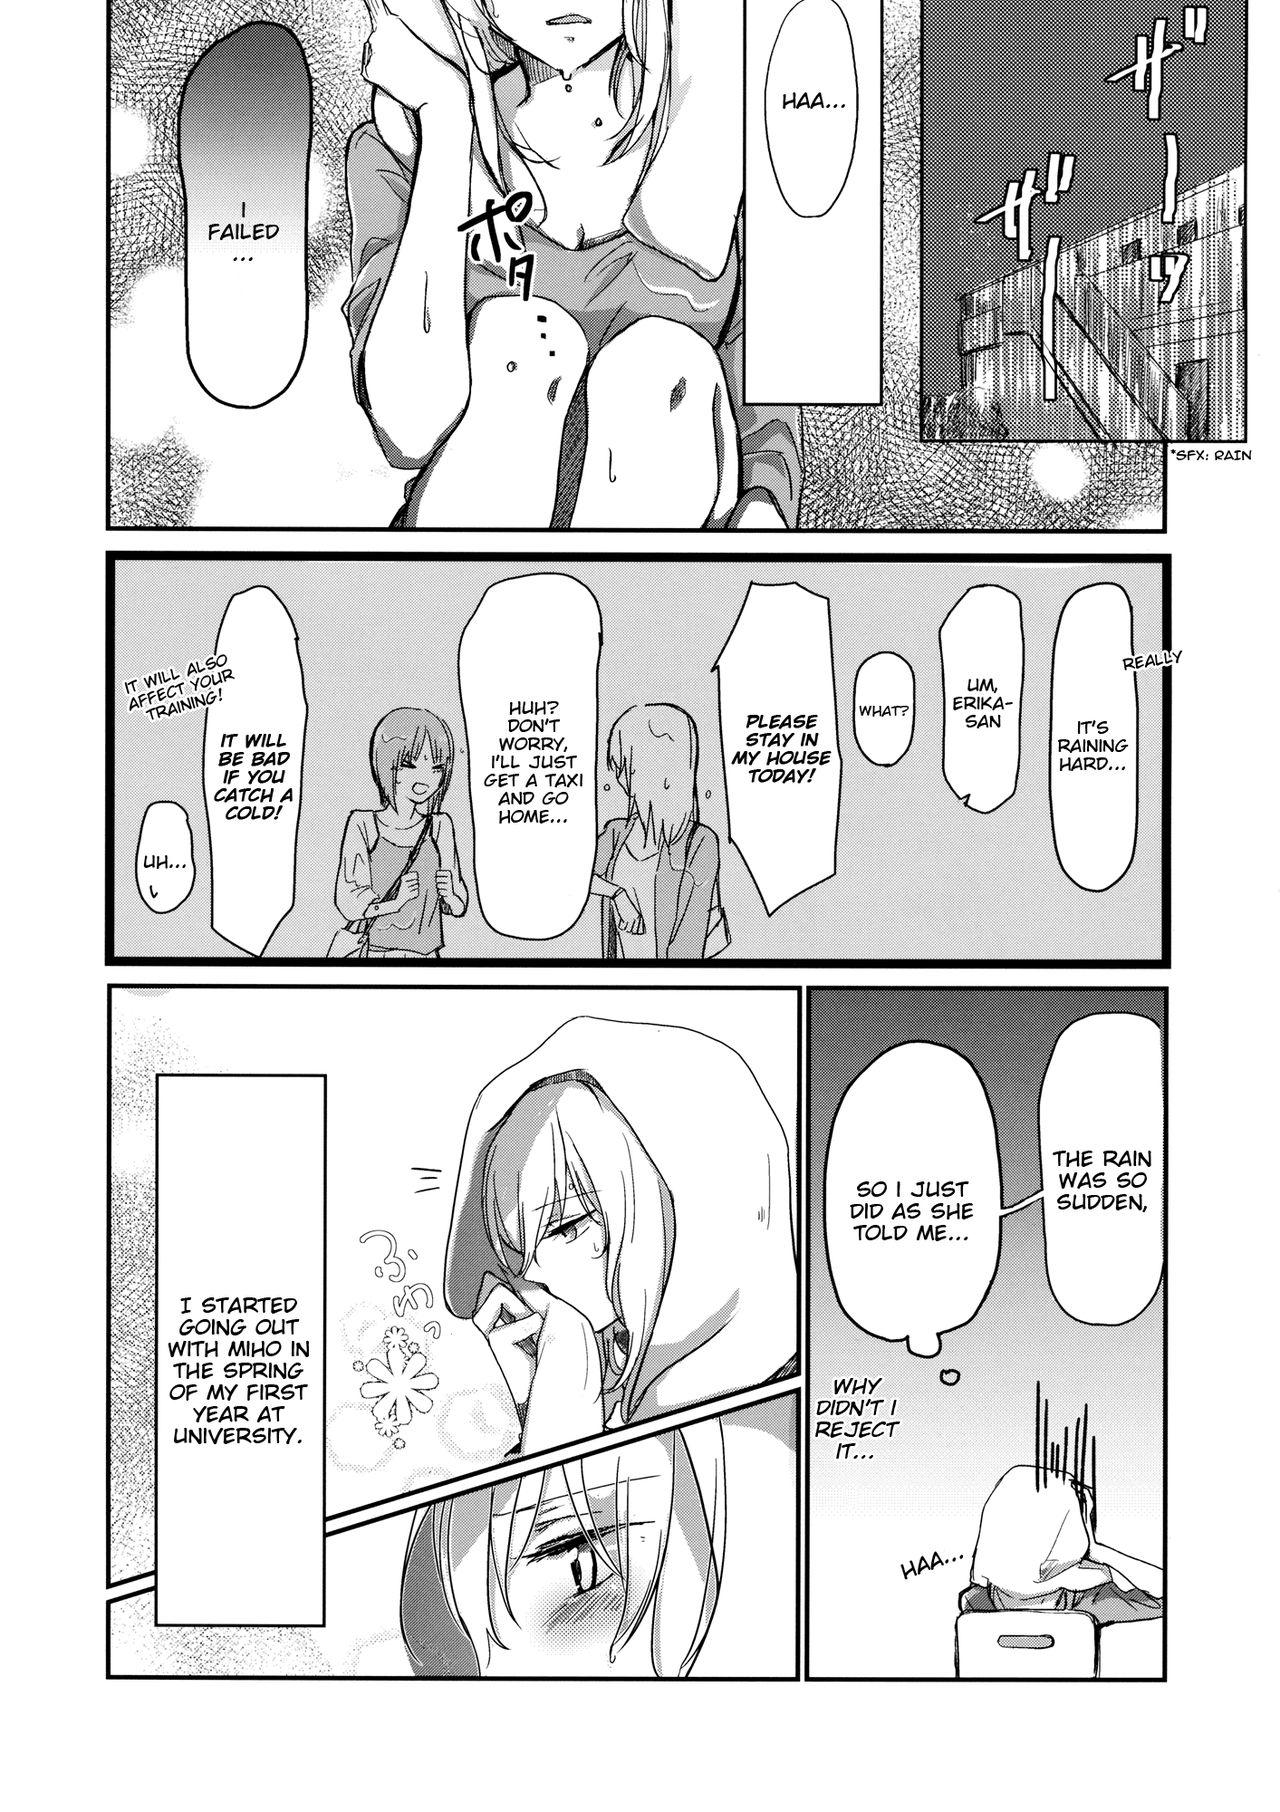 Ikillitts for the first time - Girls und panzer Freaky - Page 3